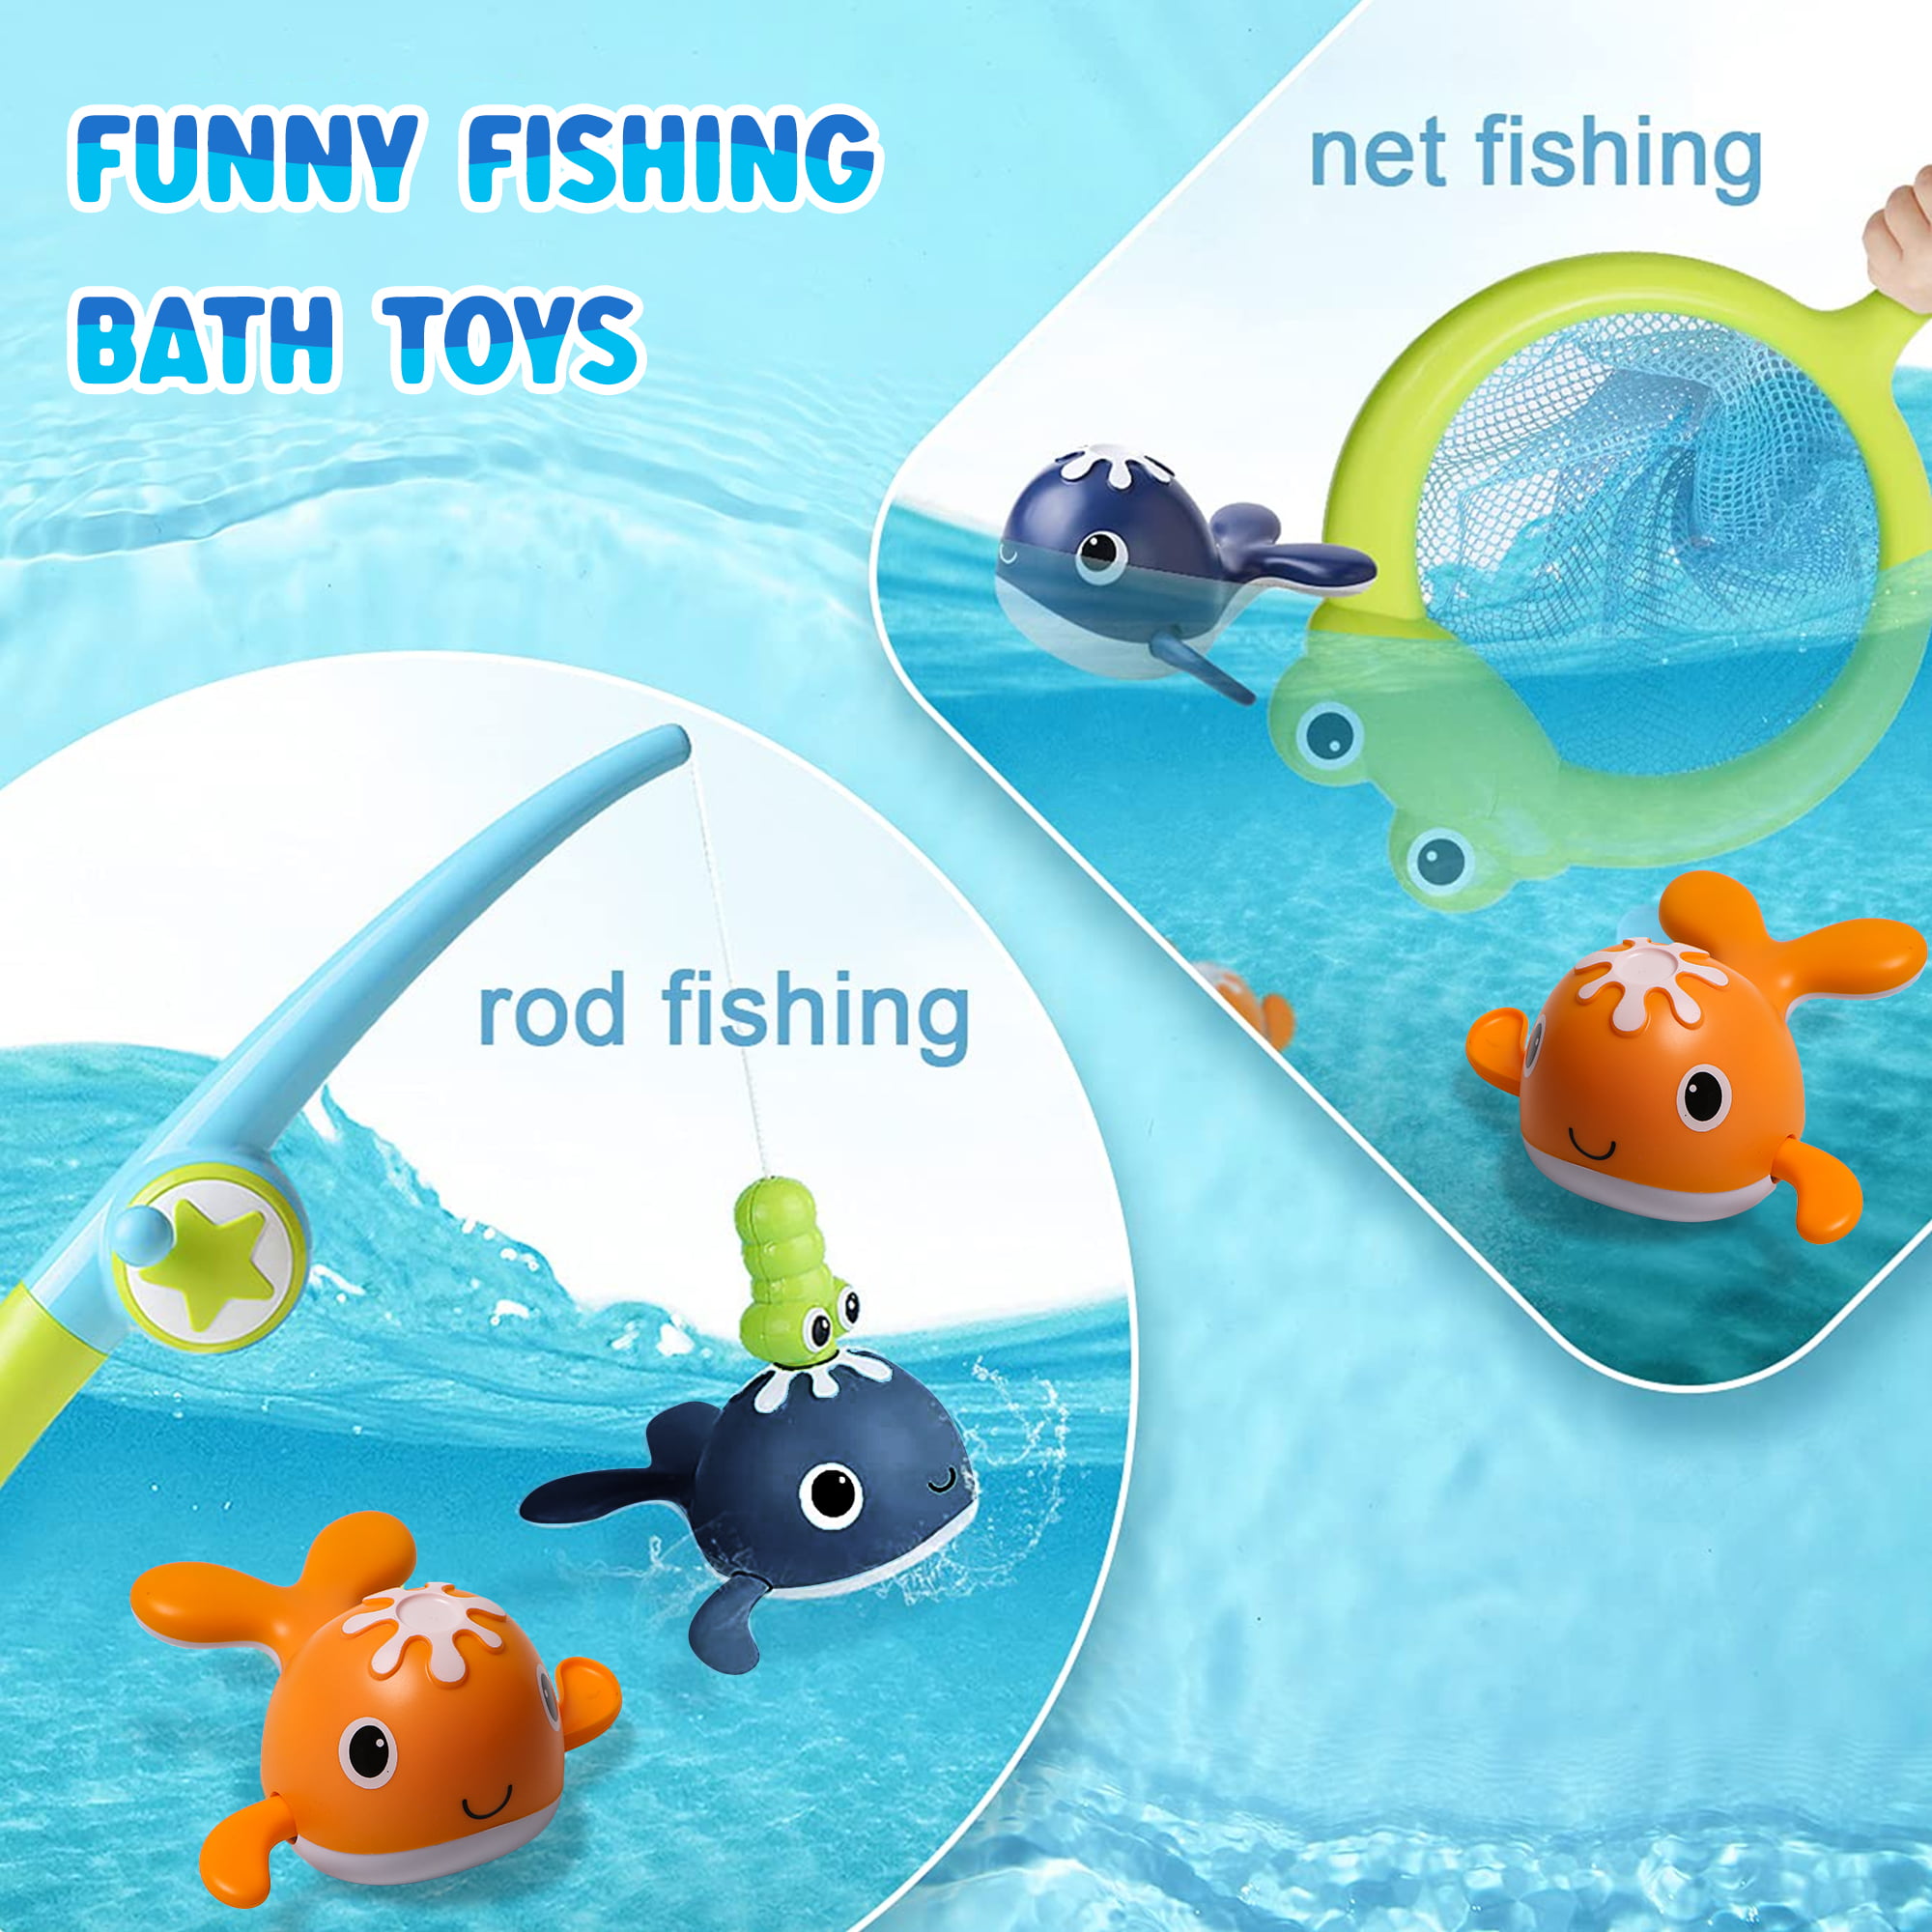 Famure Bath Toys for Toddlers Age 2-4 Bathtub Toys Fishing Net Colorful Sea  Animal ToysBath Toy for Toddlers Kids Infants Girls Boys amazing